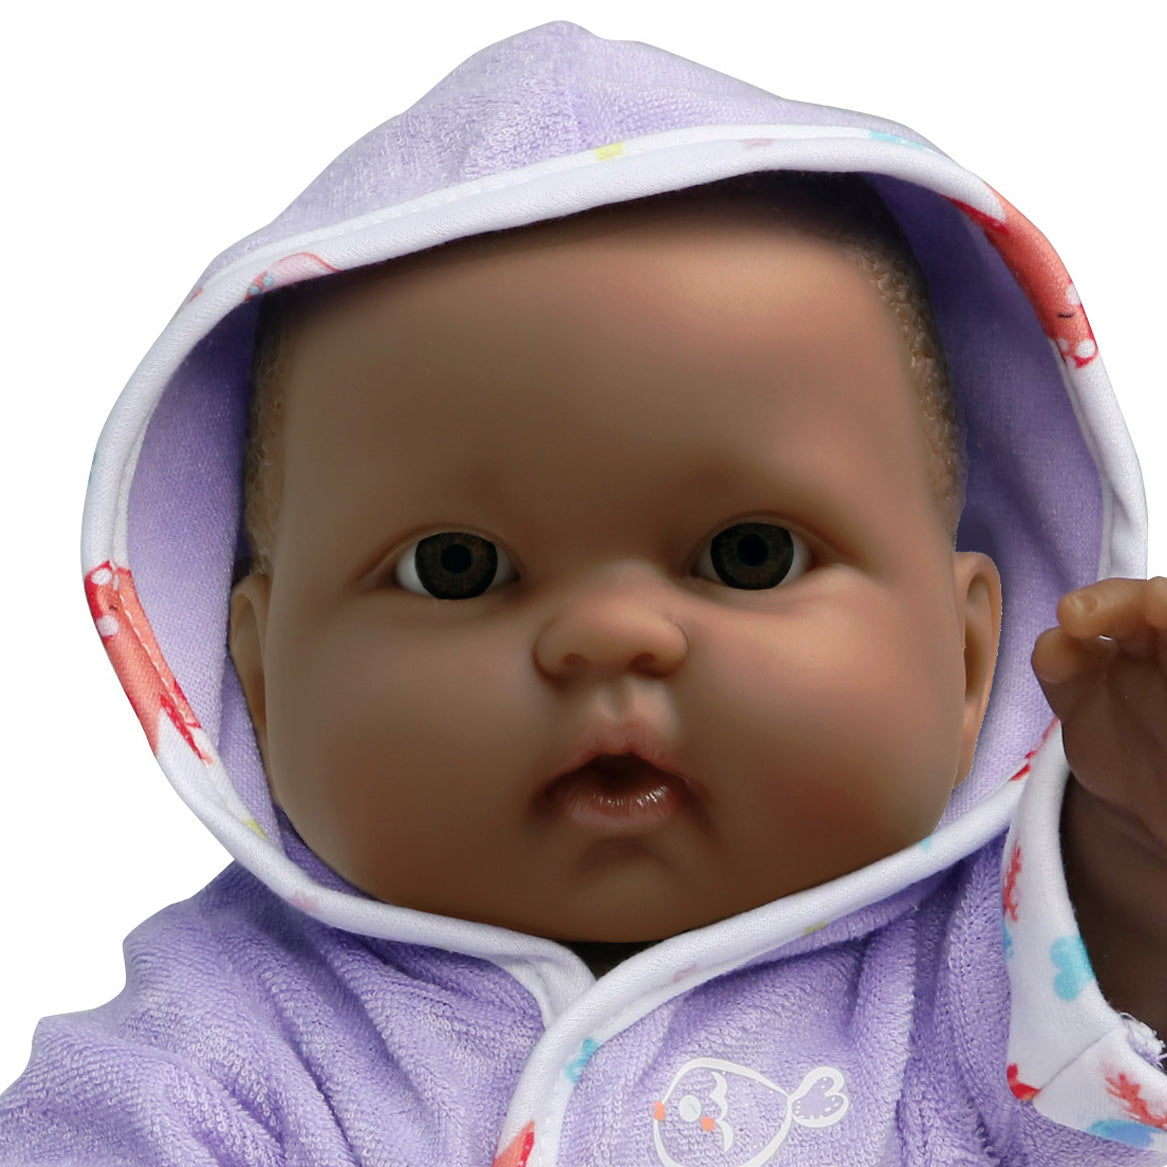 Lots to Love Babies® All-Vinyl Baby Doll w/ Hooded Towel and Bath Accessories. African American.